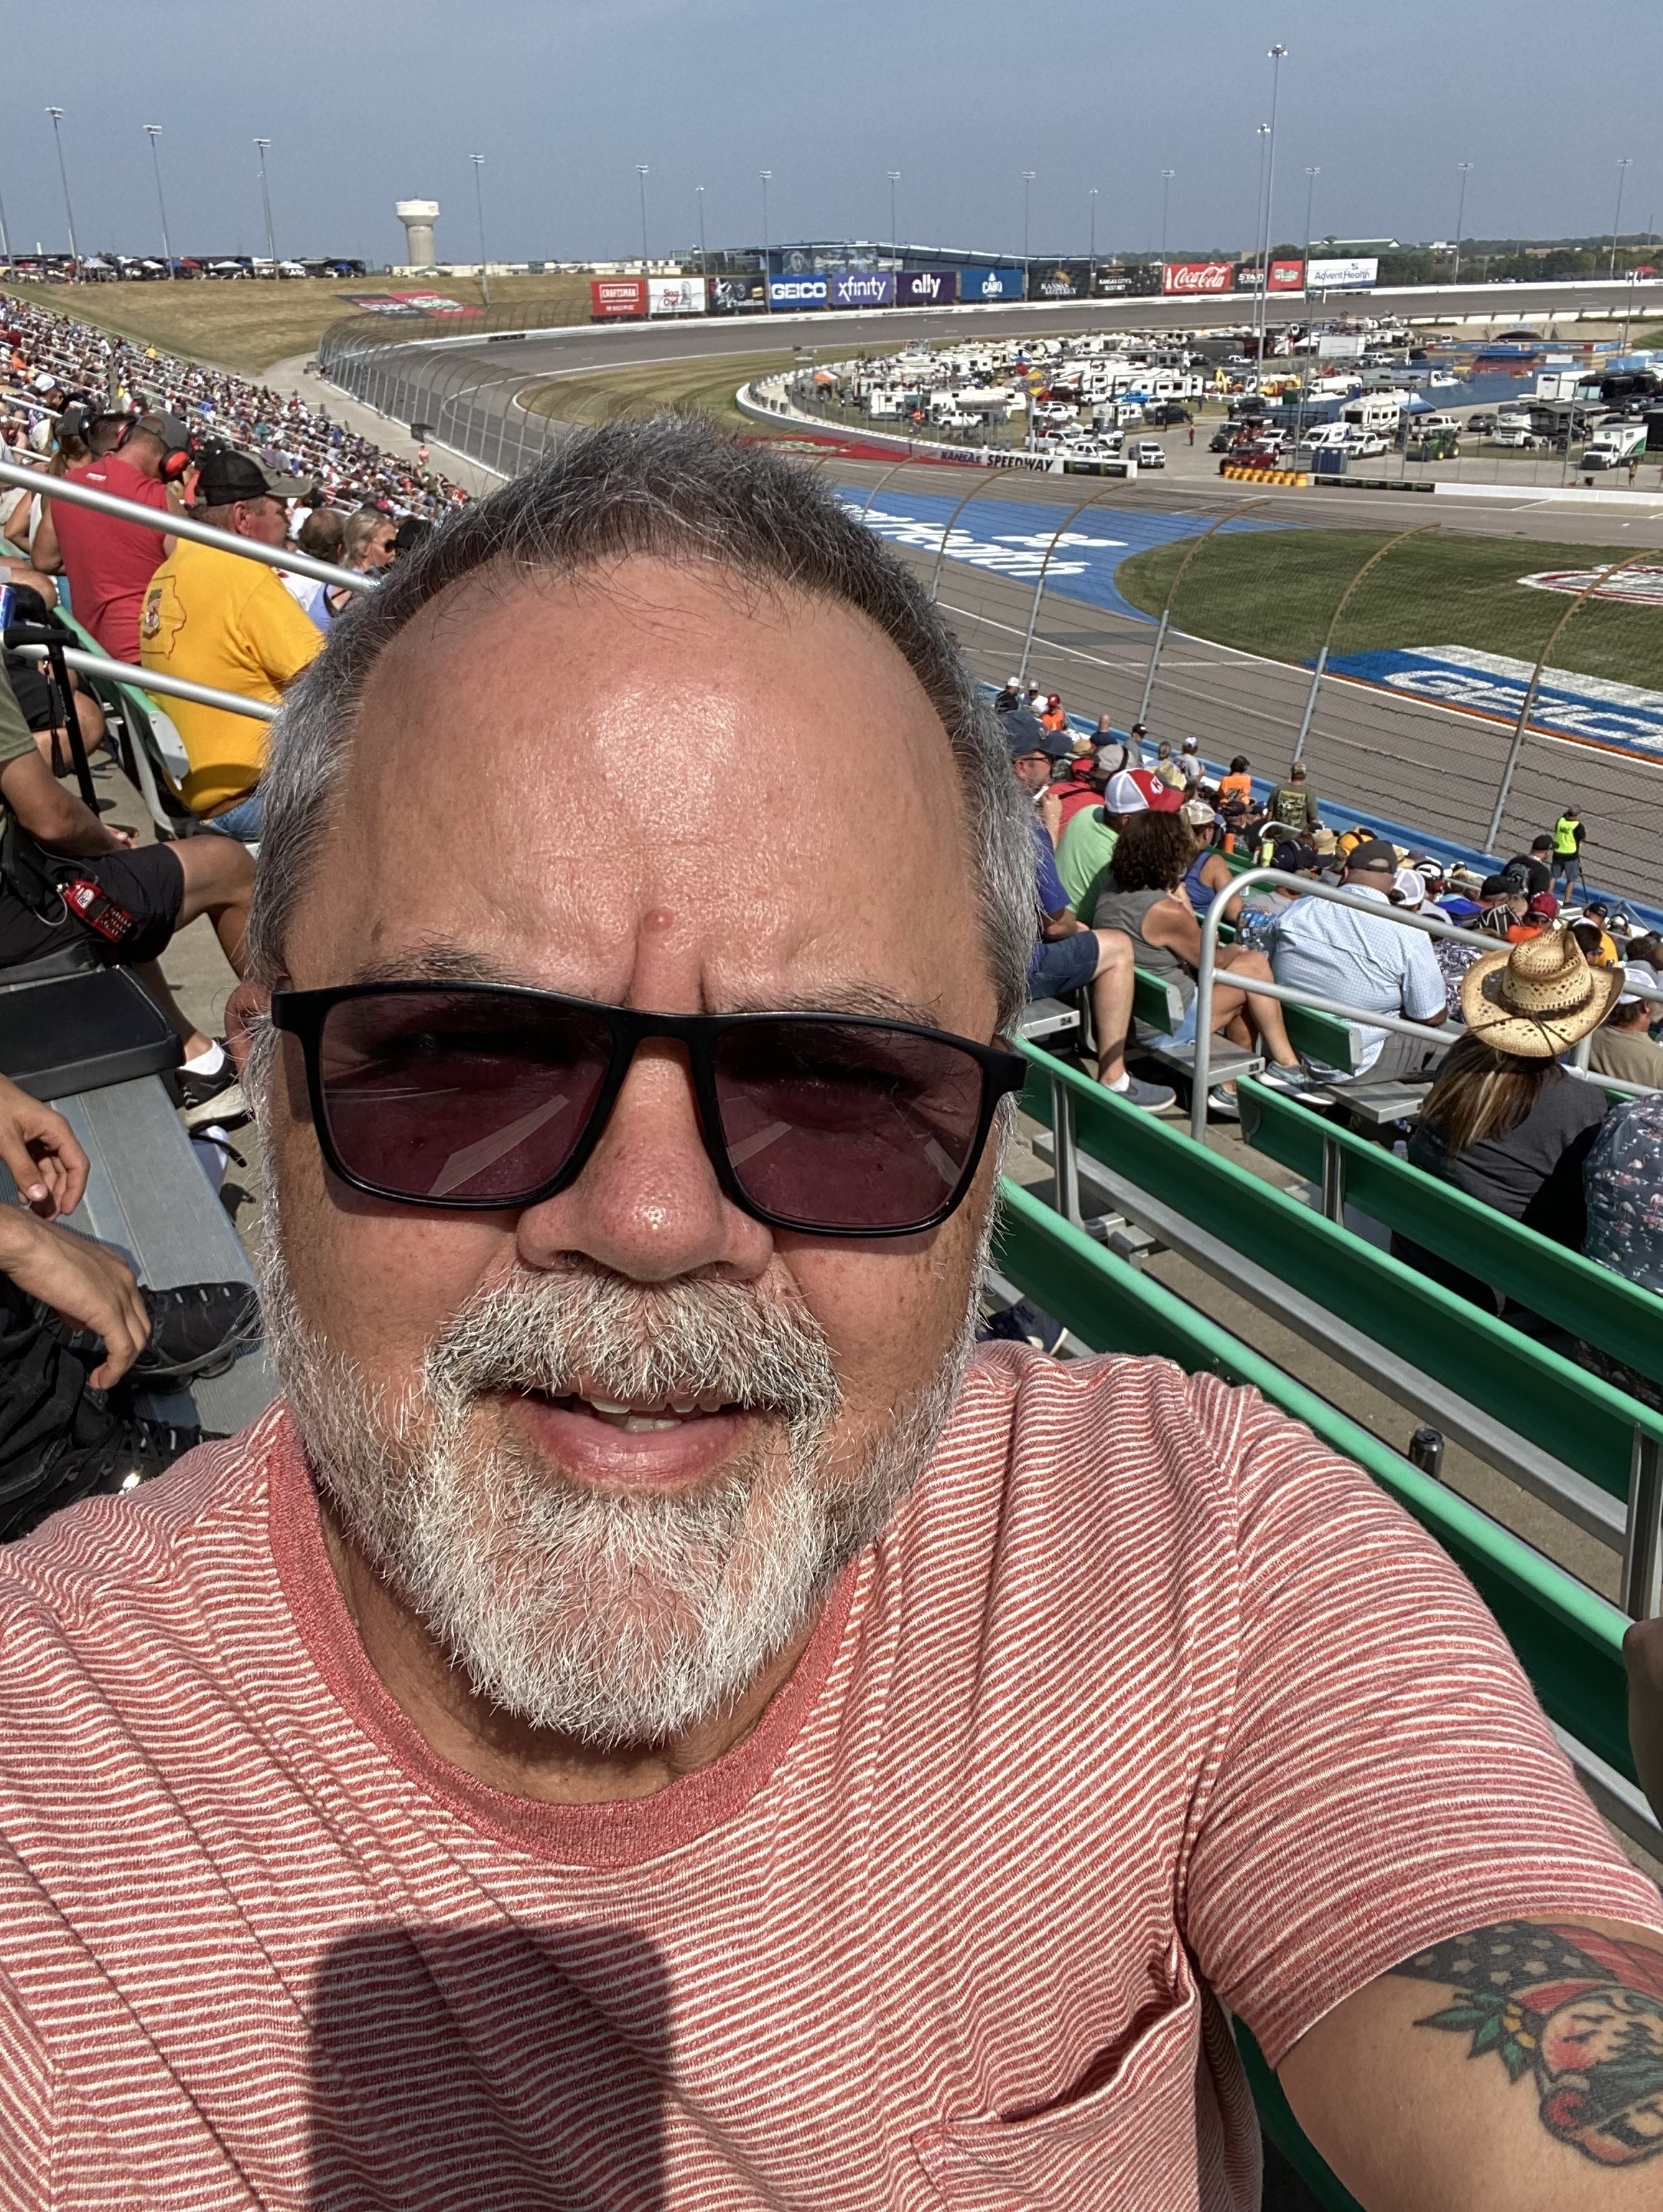 Hollywood Casino 400 - NASCAR Cup Series